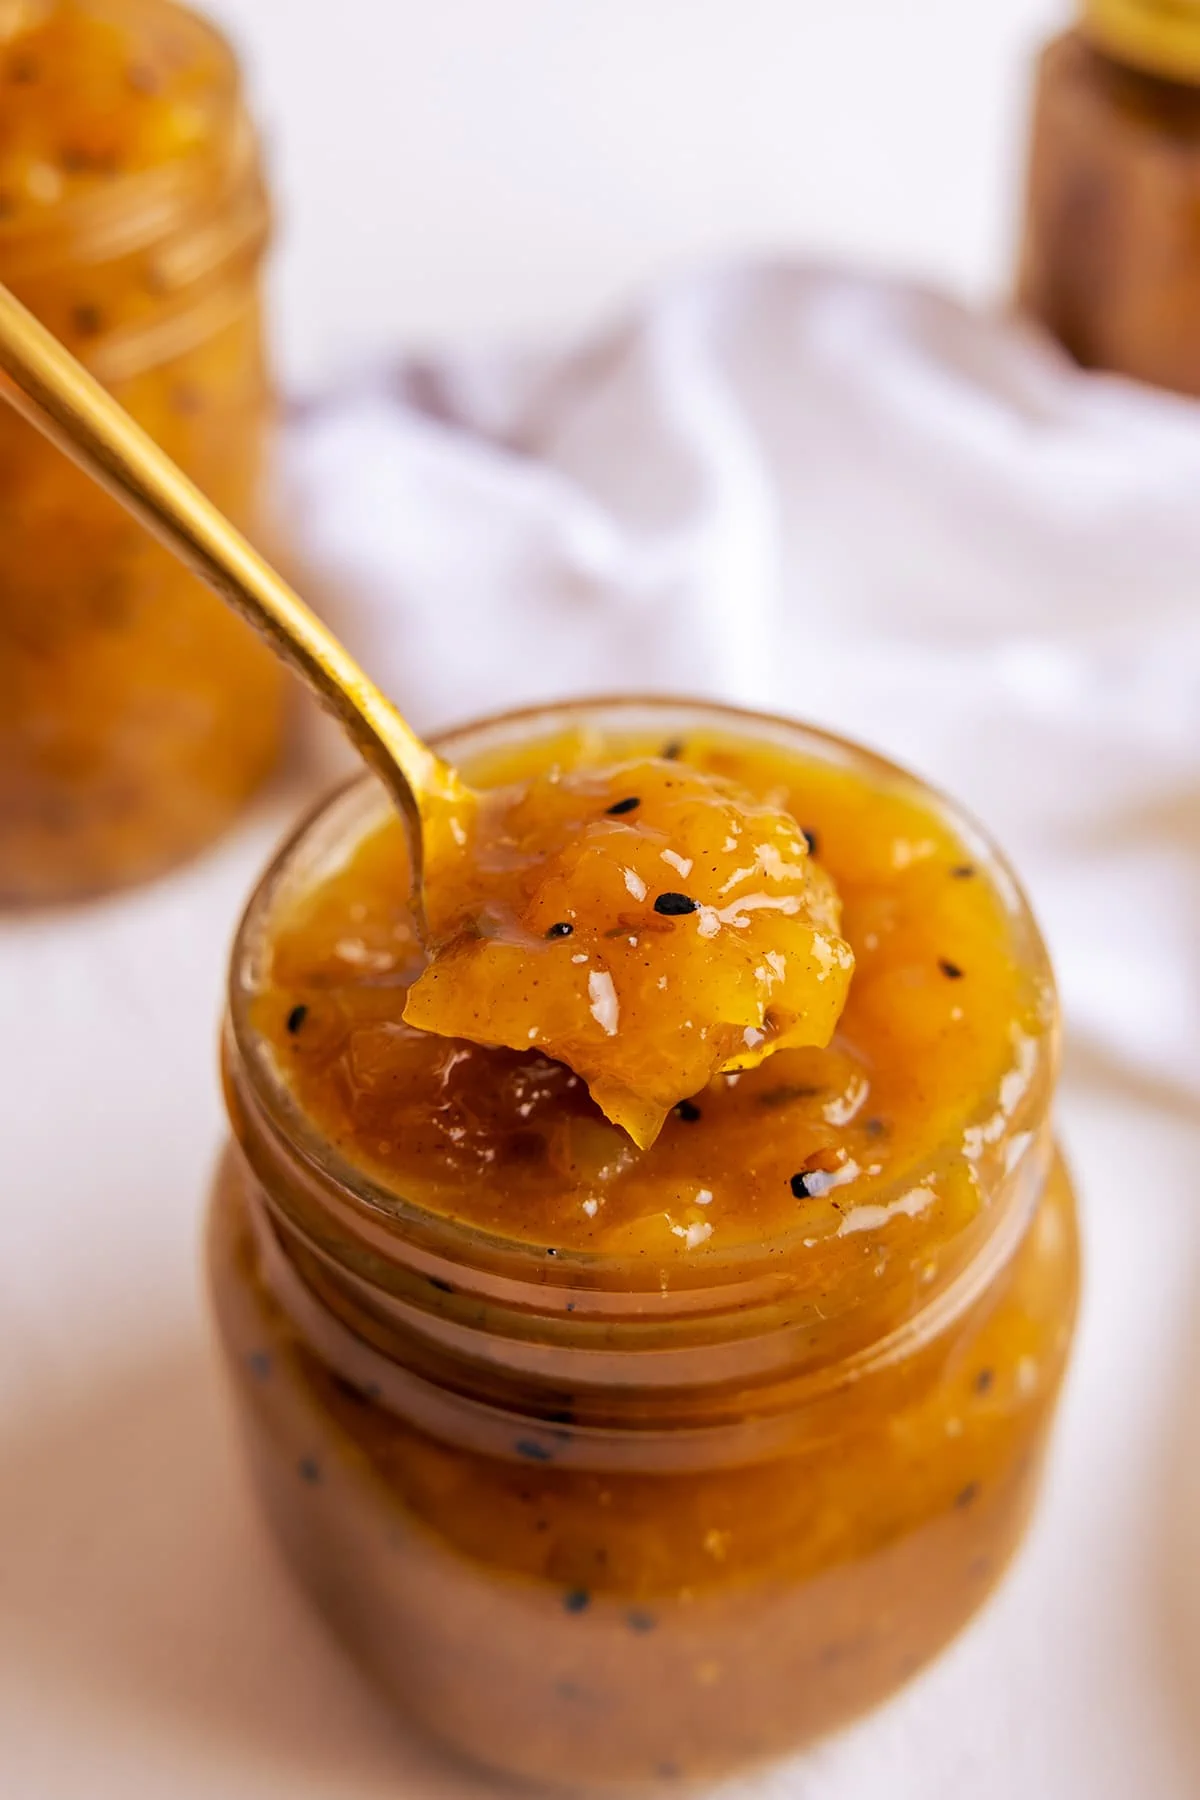 A brass spoon taking a spoon full of mango chutney out of a glass jar.